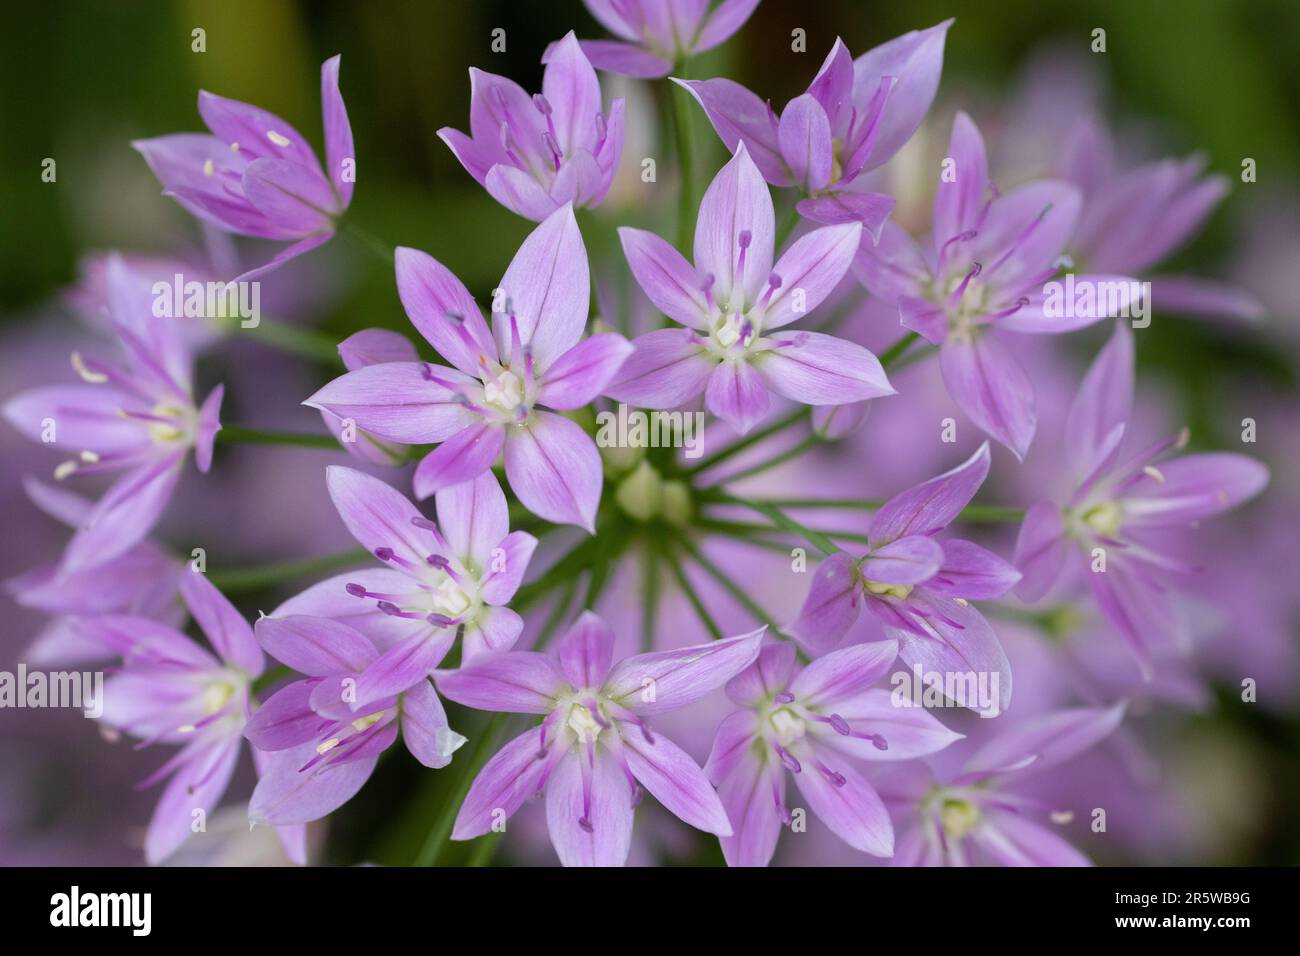 oneleaf onion garlic flower cluster with purple blooms and a blurred background Stock Photo